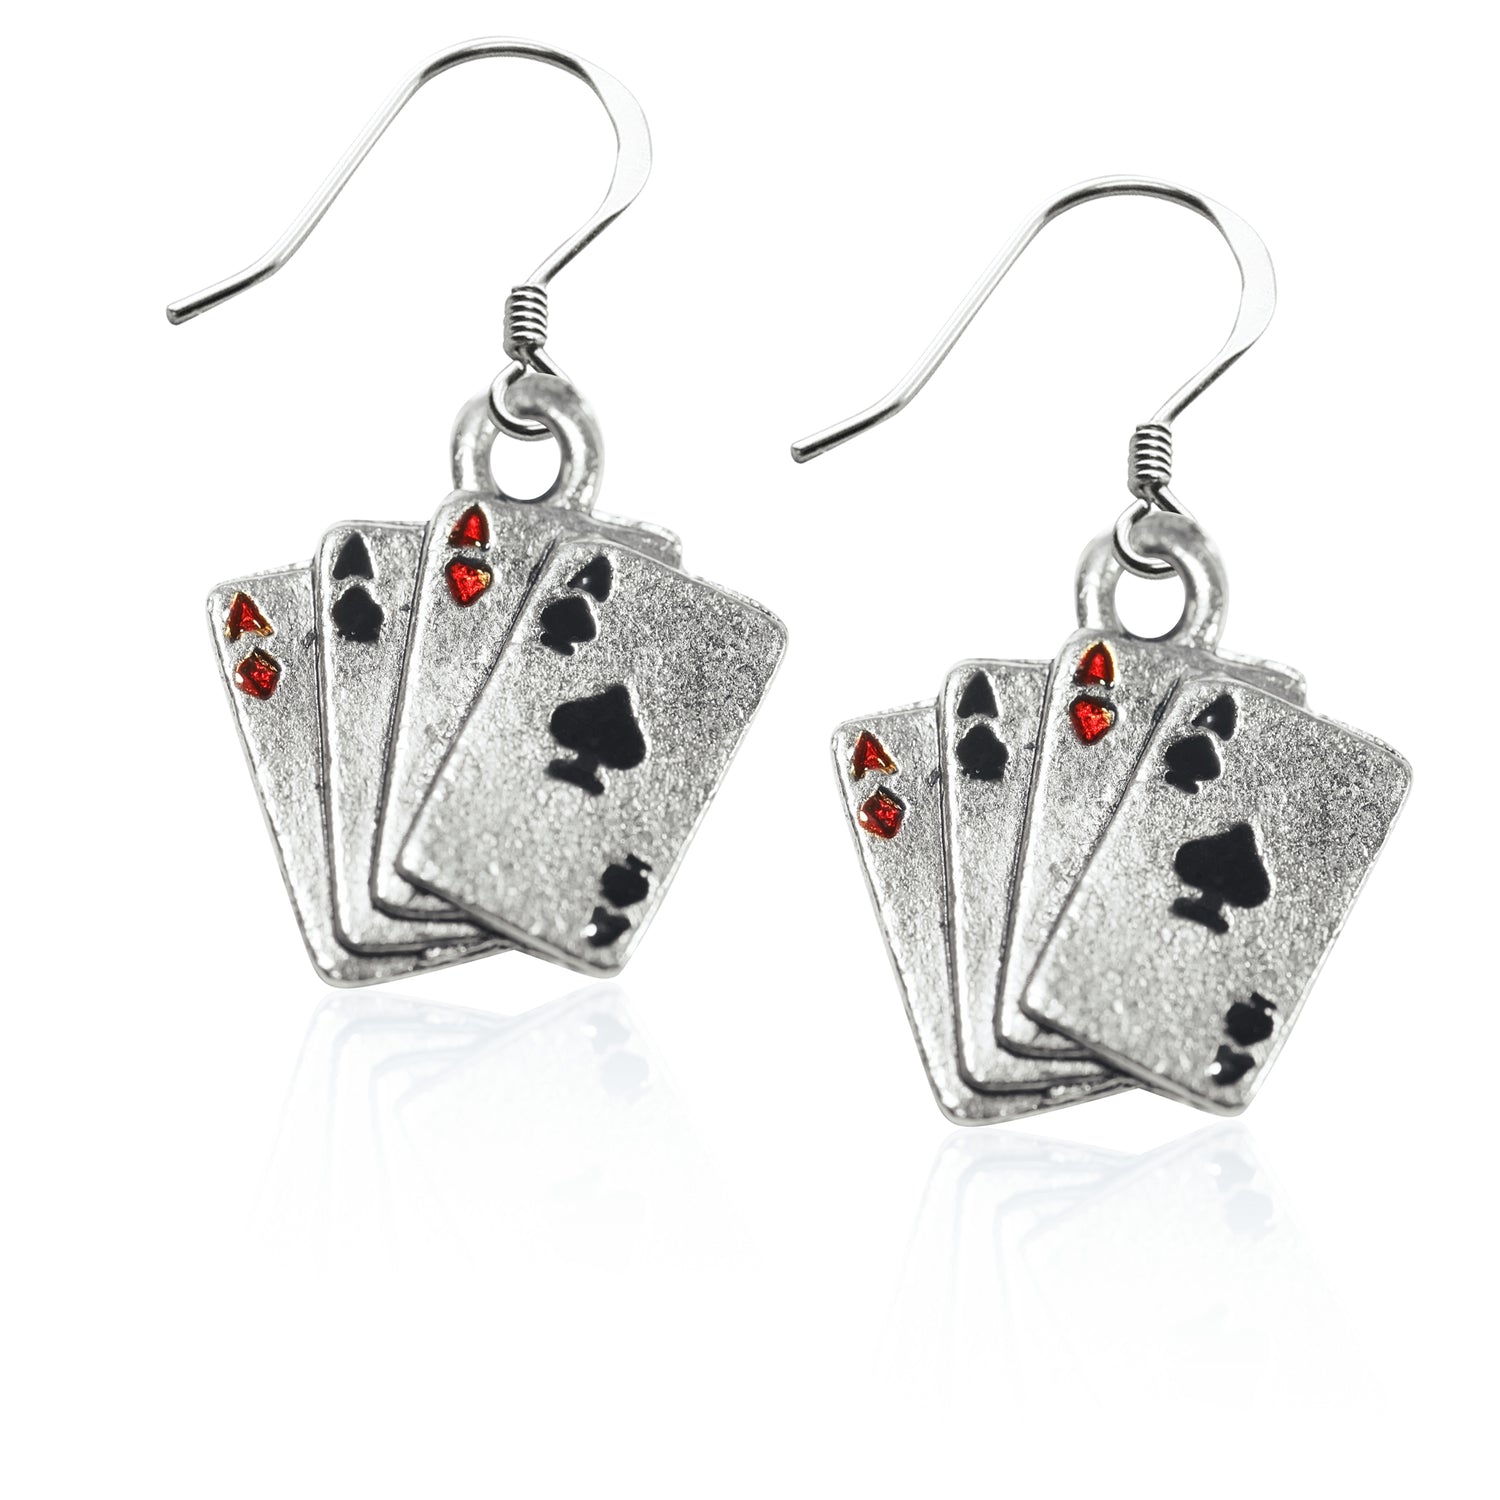 Whimsical Gifts | Aces Charm Earrings in Silver Finish | Hobbies & Special Interests | Casino | Gaming | Game Night | Jewelry